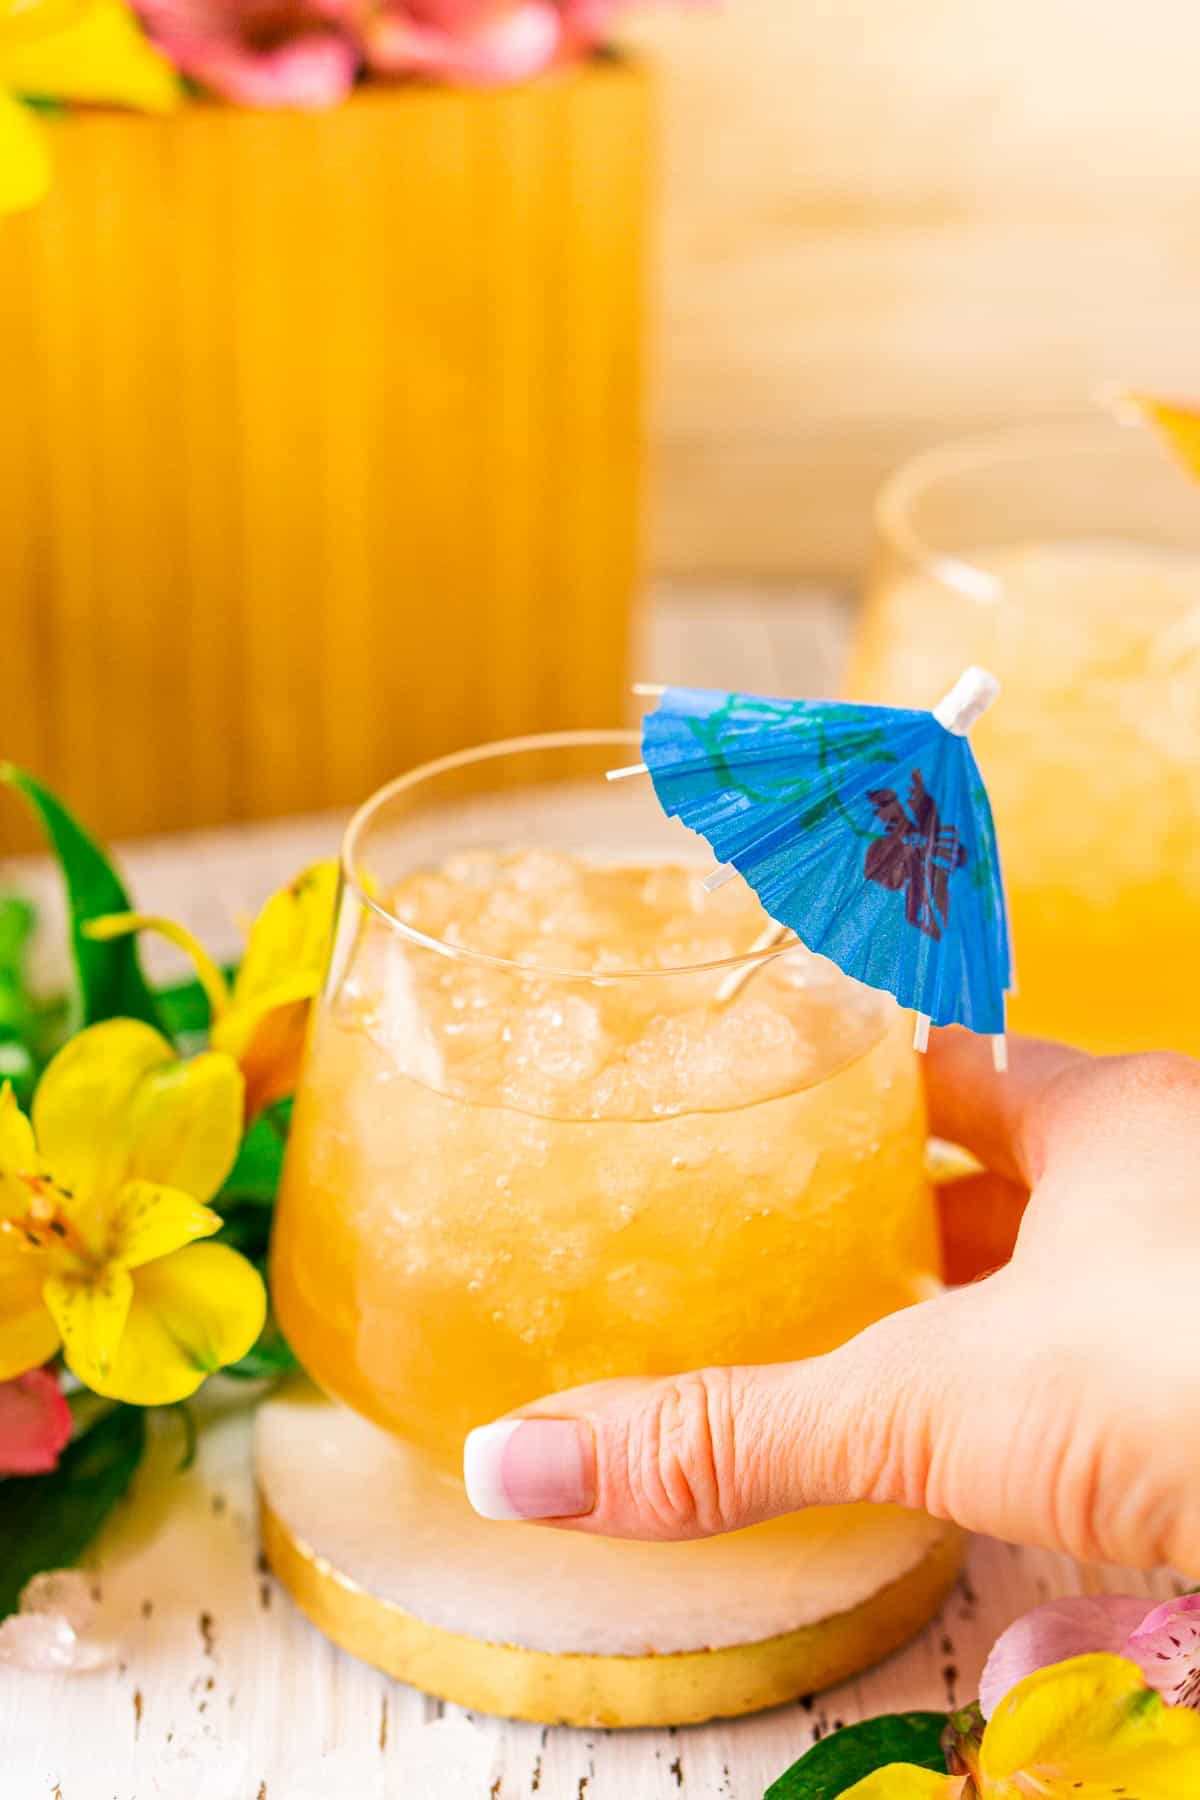 A hand grabbing a glass of the Barbados rum punch on a white coaster with flowers around it.